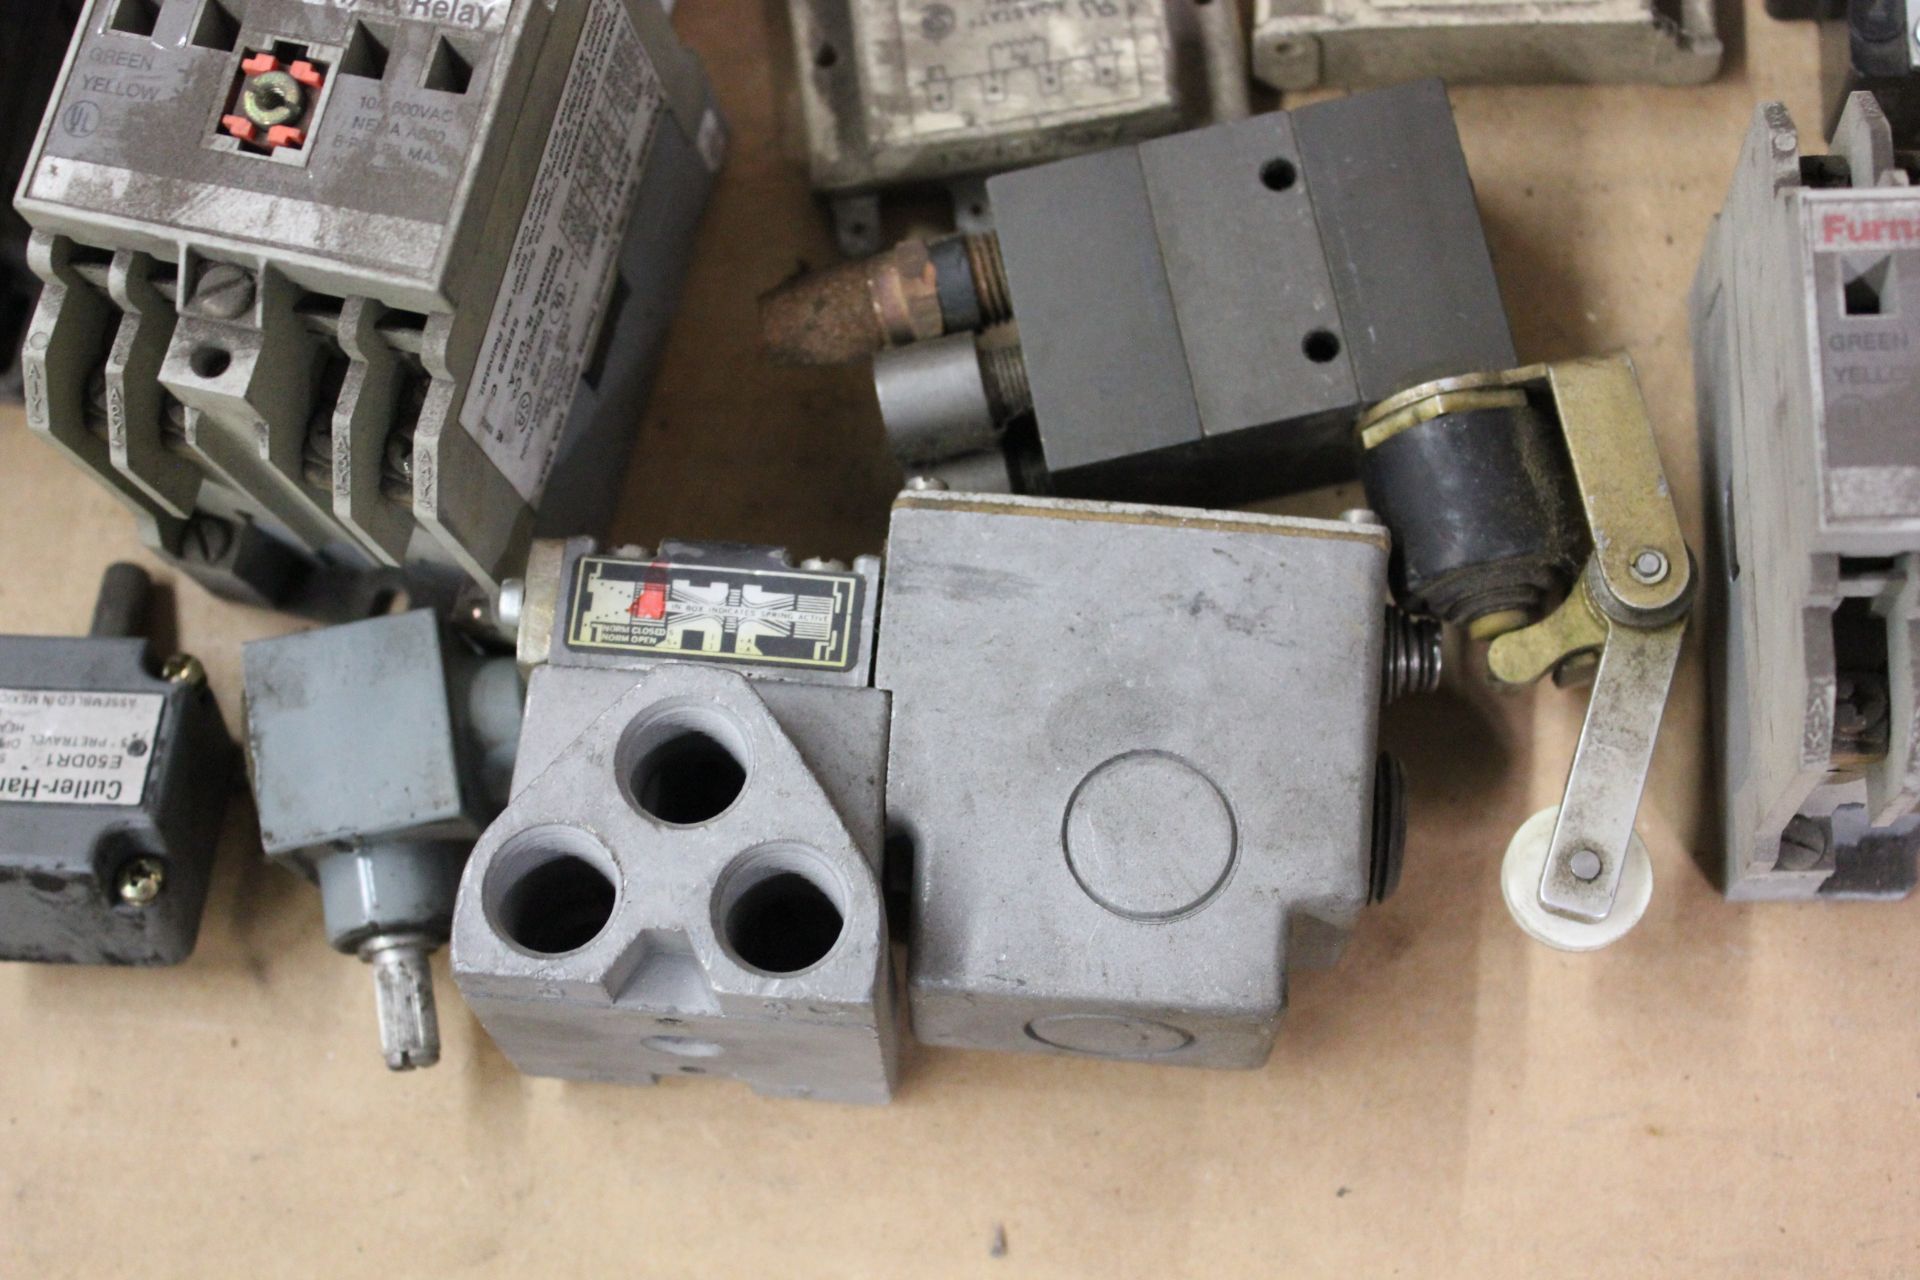 LOT OF CIRCUIT BREAKERS AND PARTS - Image 7 of 7